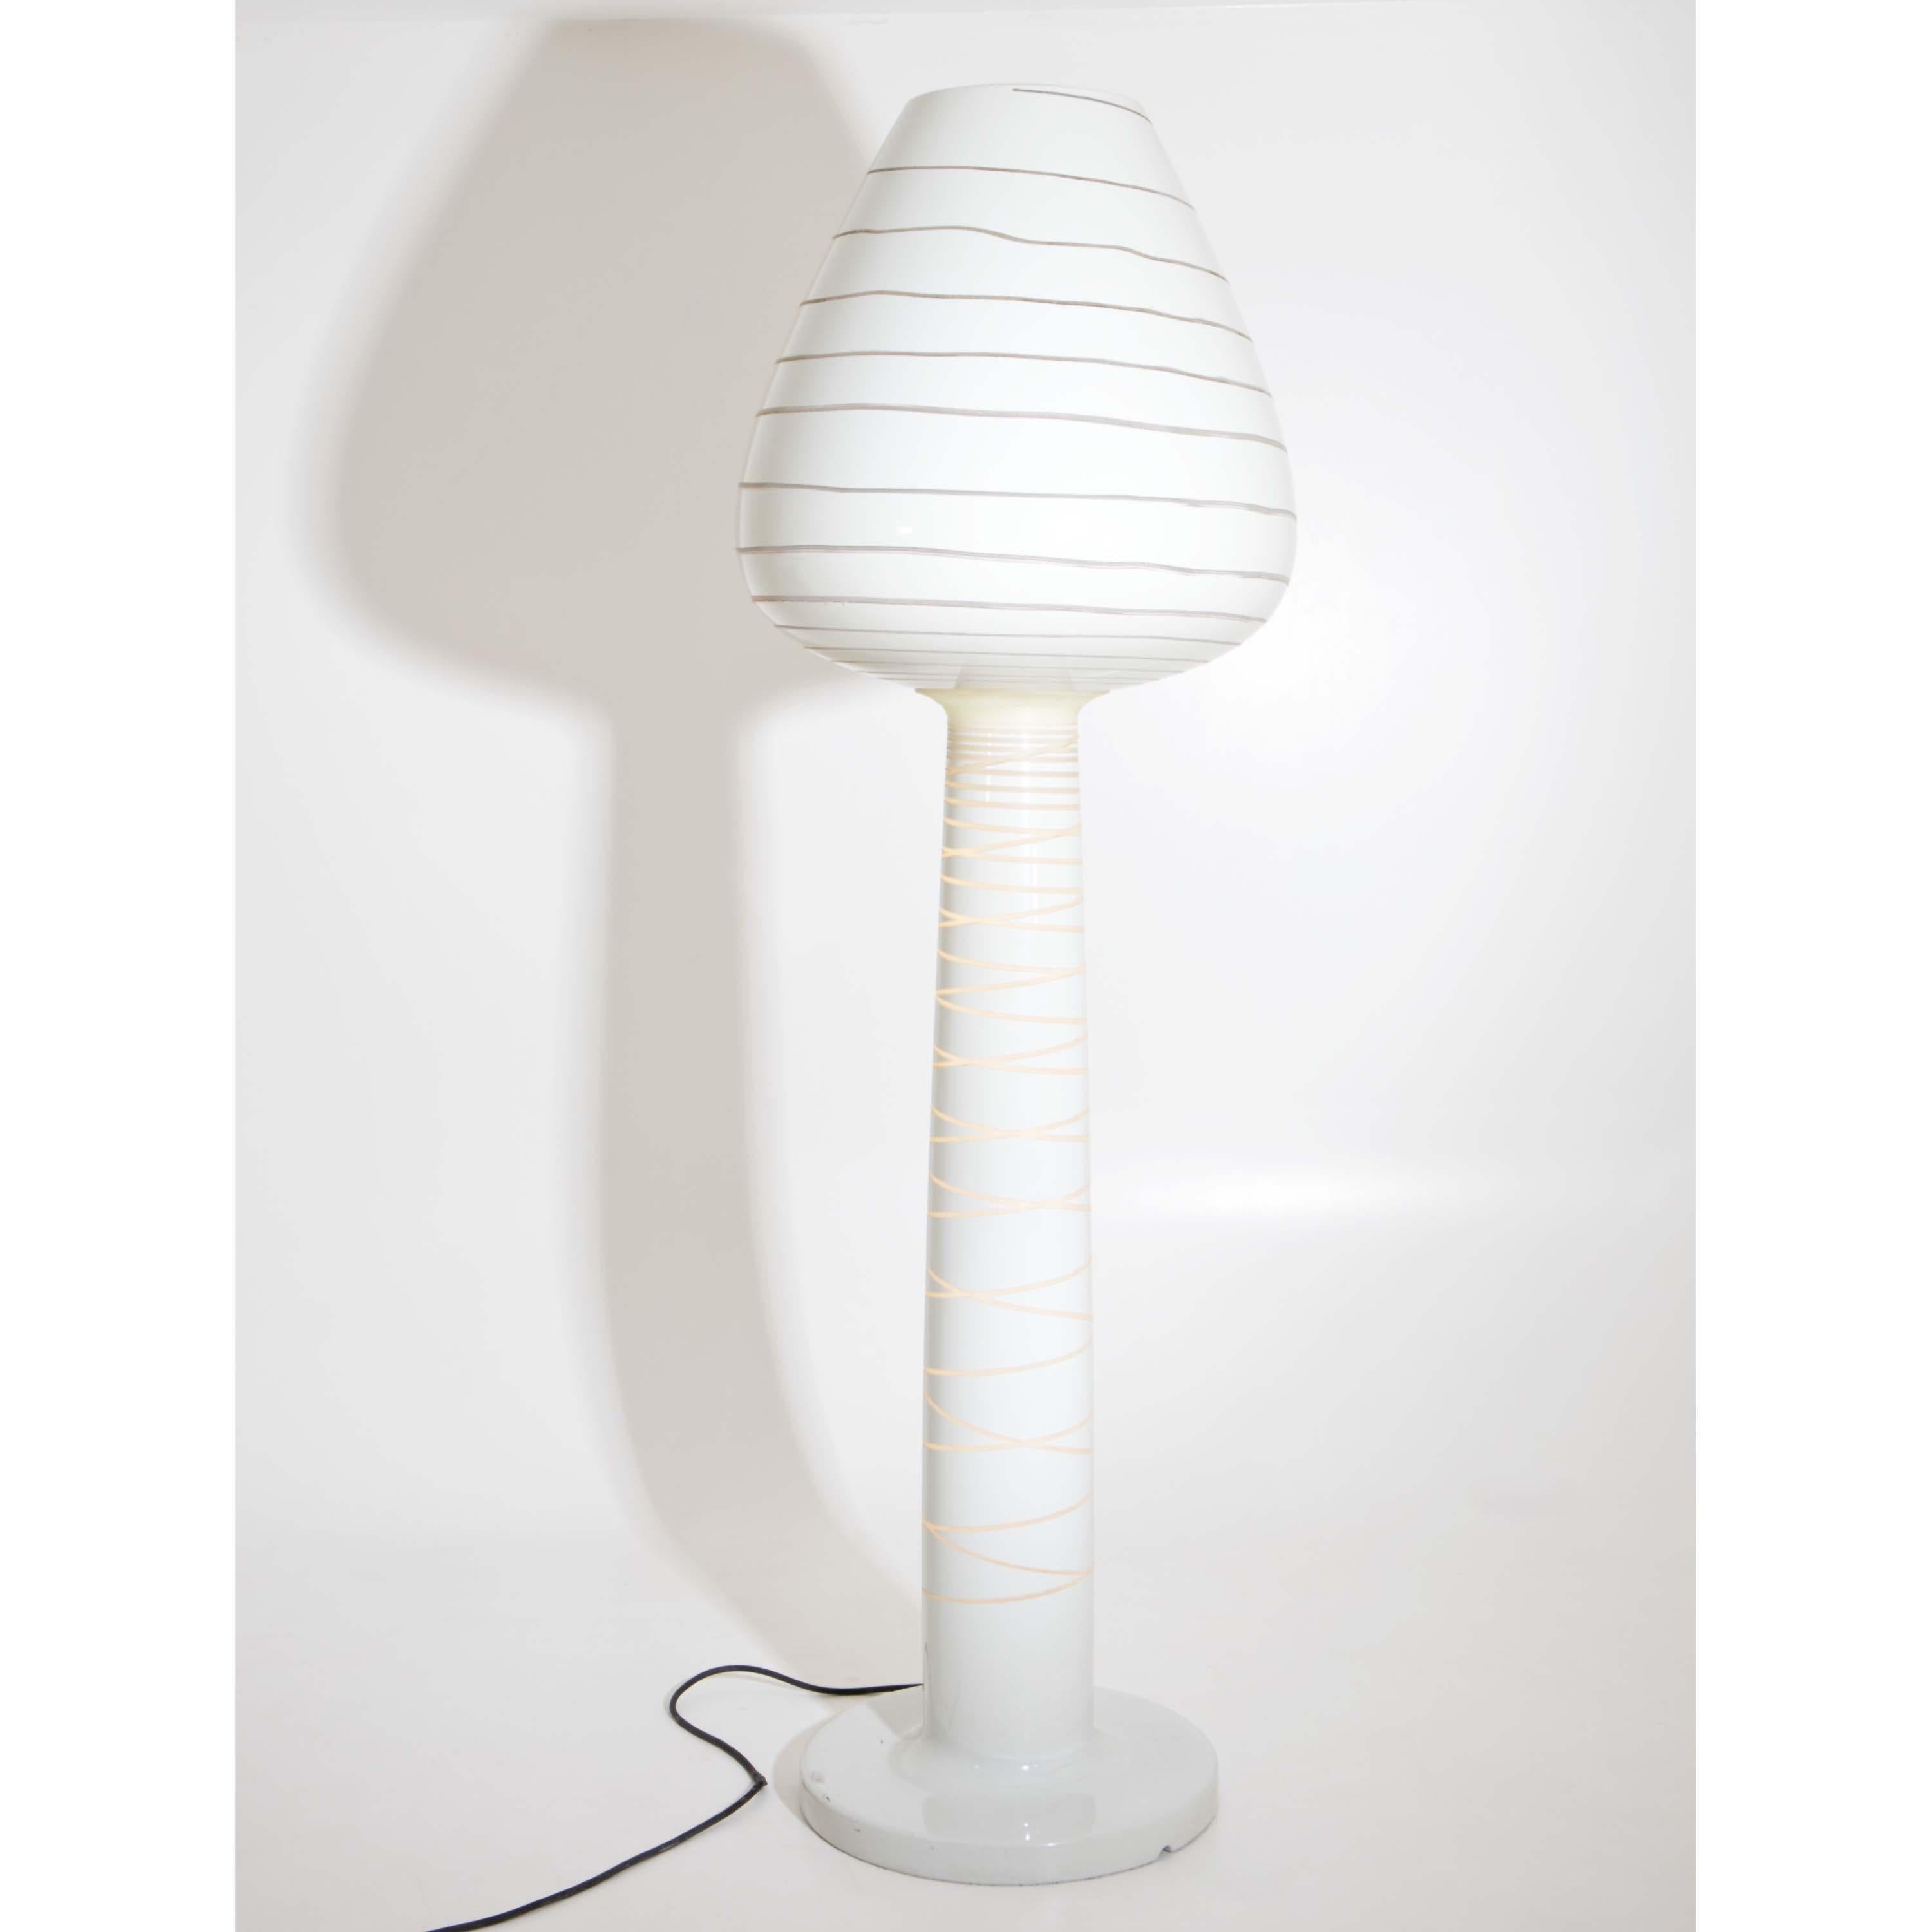 Large cream white polyethylene floor lamp in tulip shape. The translucent, spirally arranged line wraps around the entire foot and head and creates a special light effect. Embossed on the base 